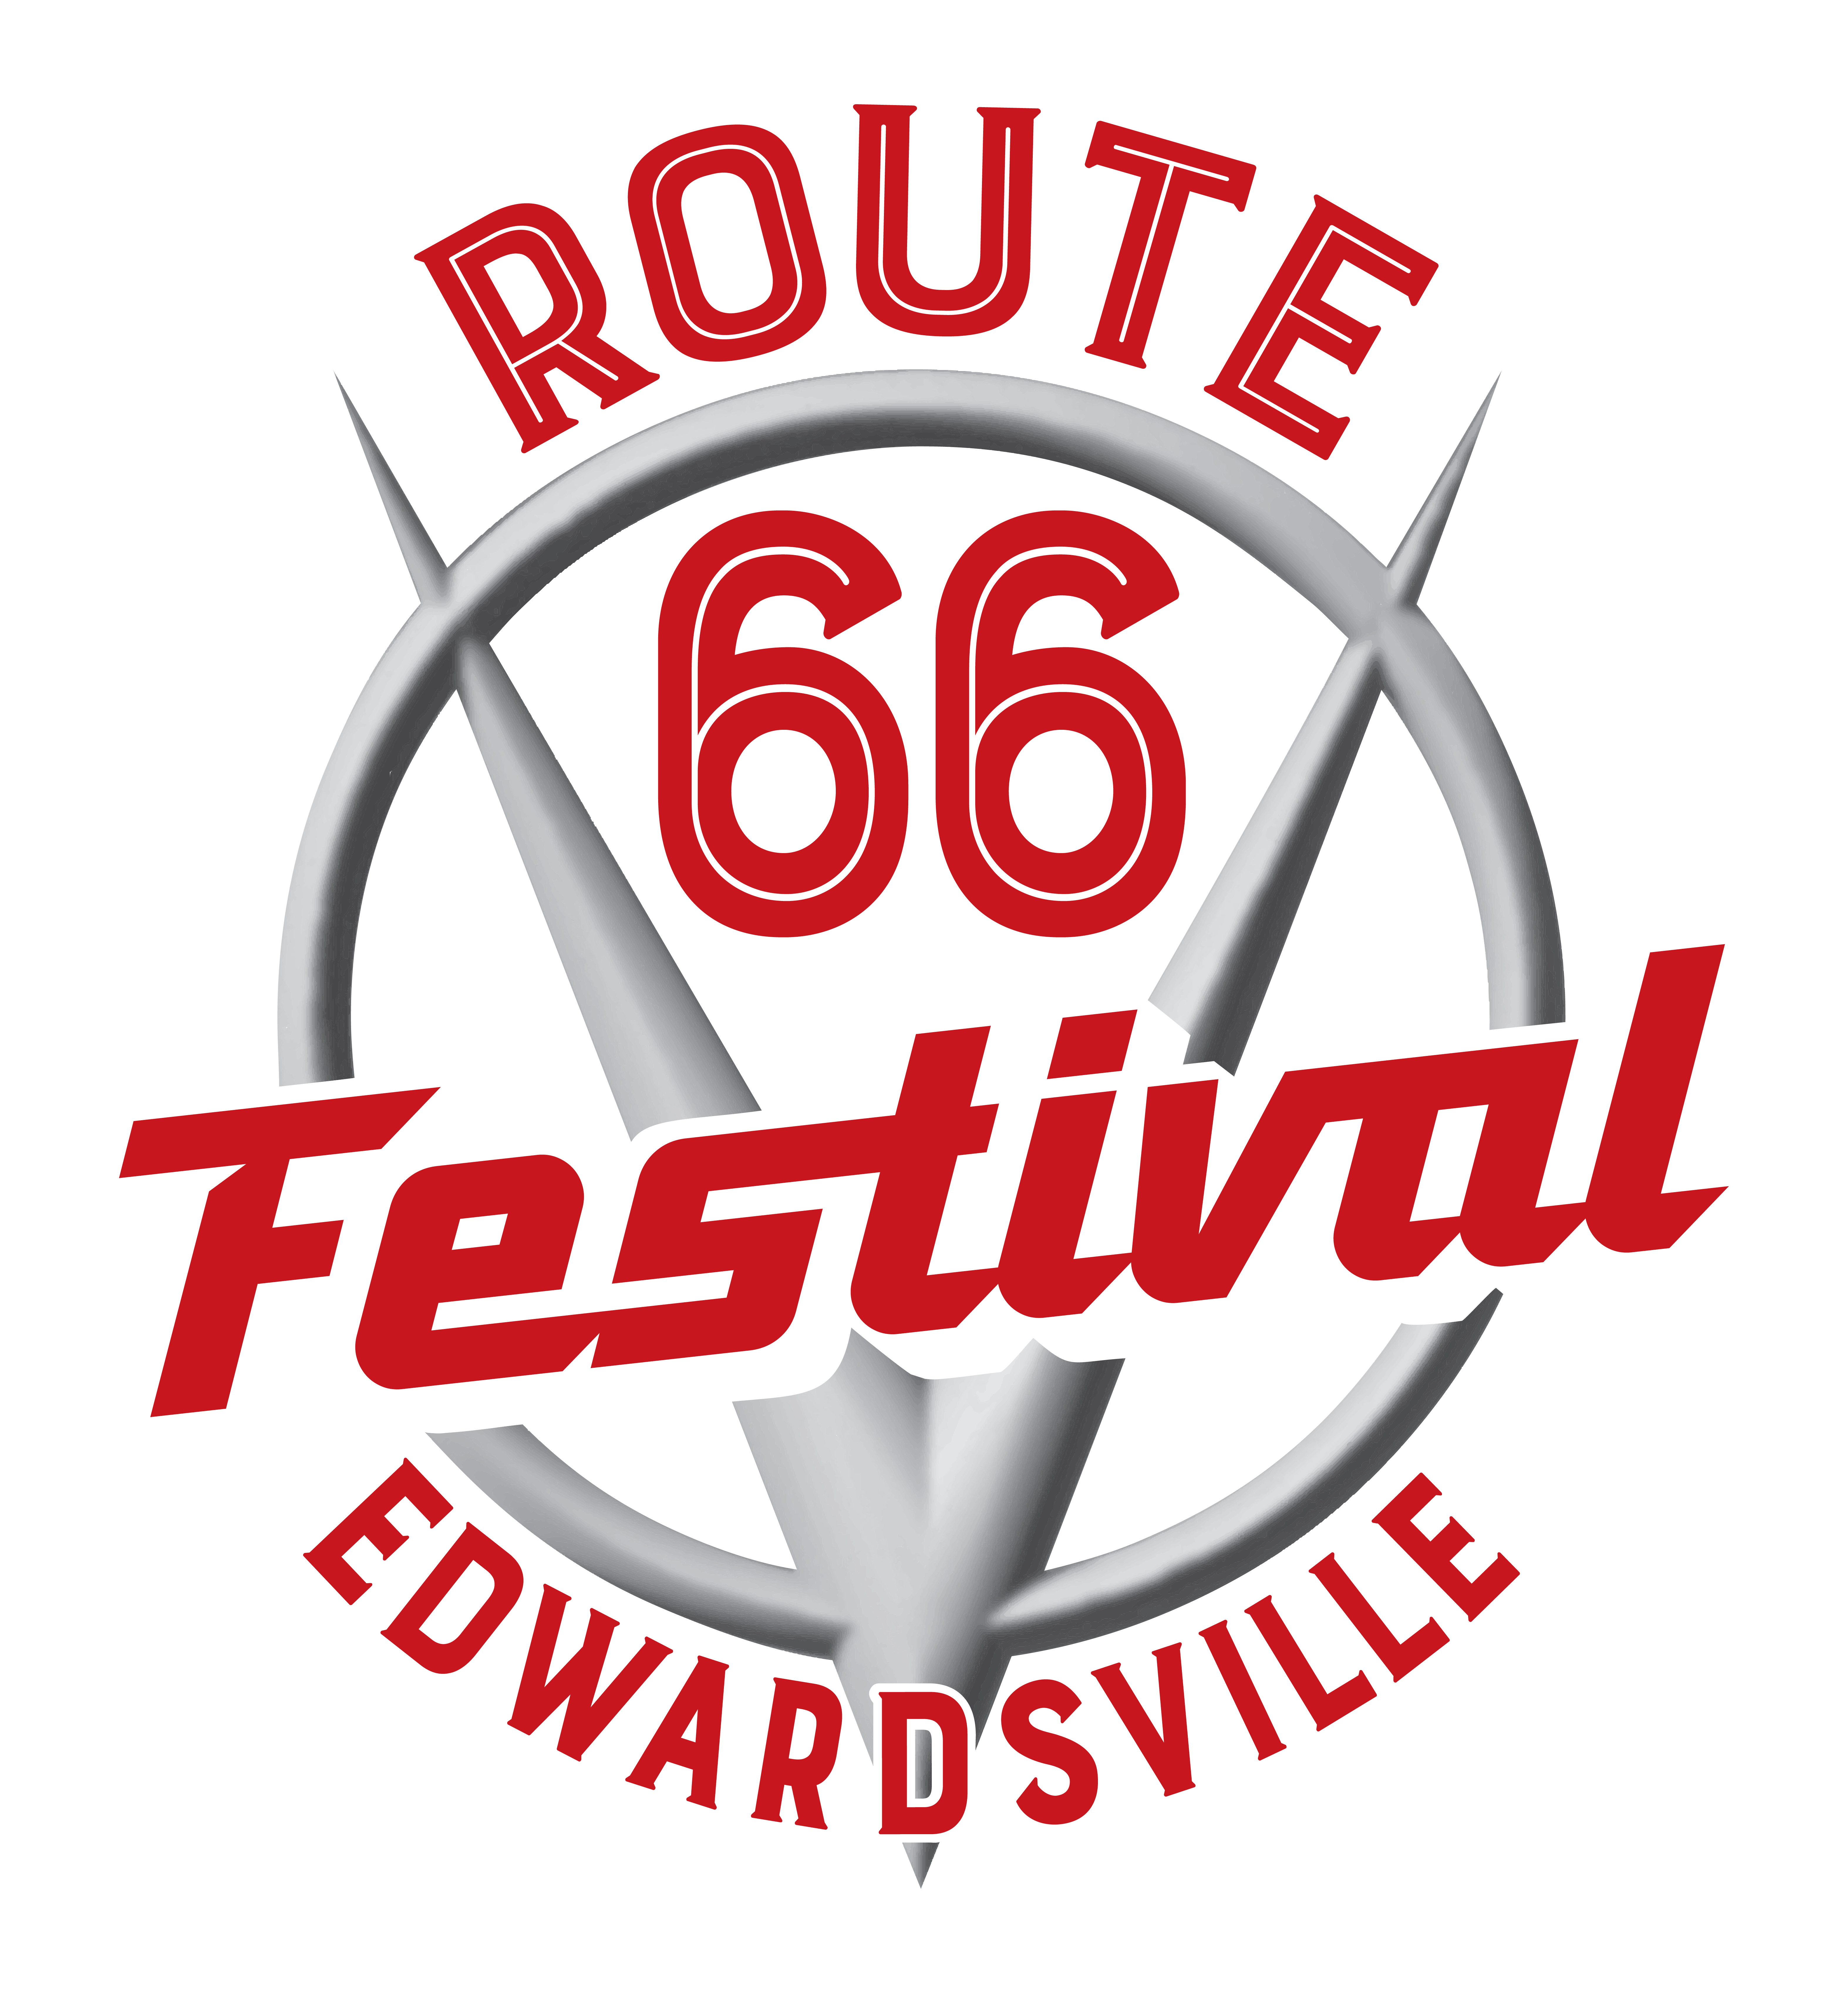 Edwardsville Route 66 Festival is this Saturday 6/10/23!